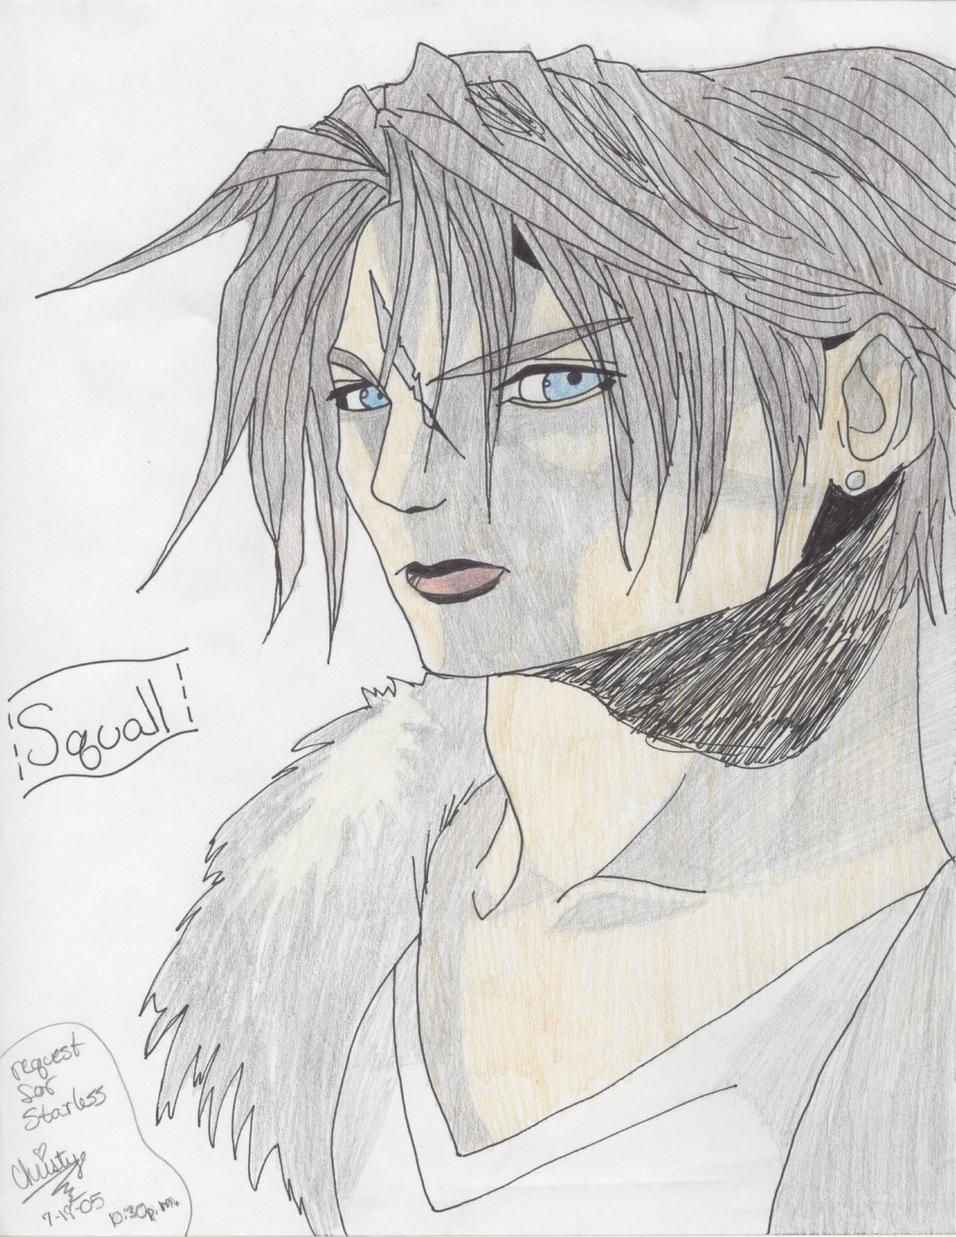 Squall (request for Starless) by Shiv_Freak